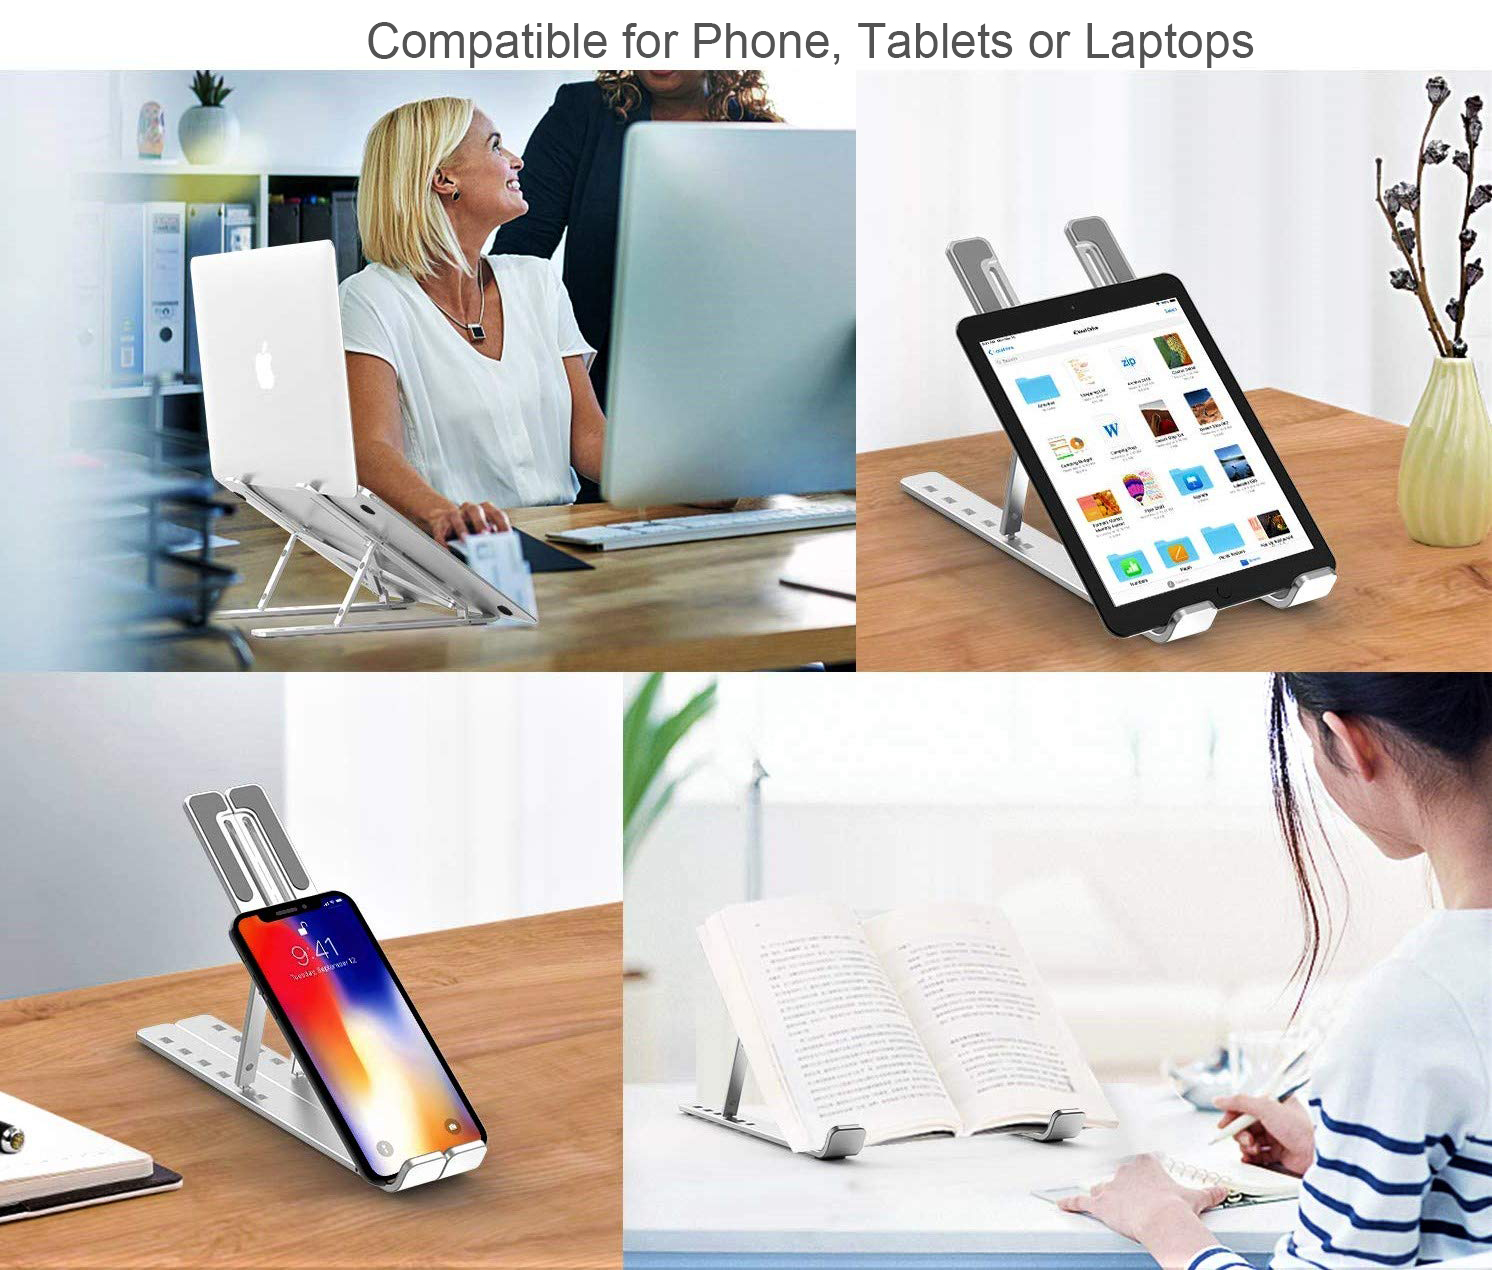 Laptop-Accessories-Laptop-Stand-for-Desk-7-Adjustable-Angles-Laptop-Holder-Riser-100-Full-Aluminum-alloy-Computer-Stand-Ergonomic-Foldable-Notebook-Stand-Durable-47